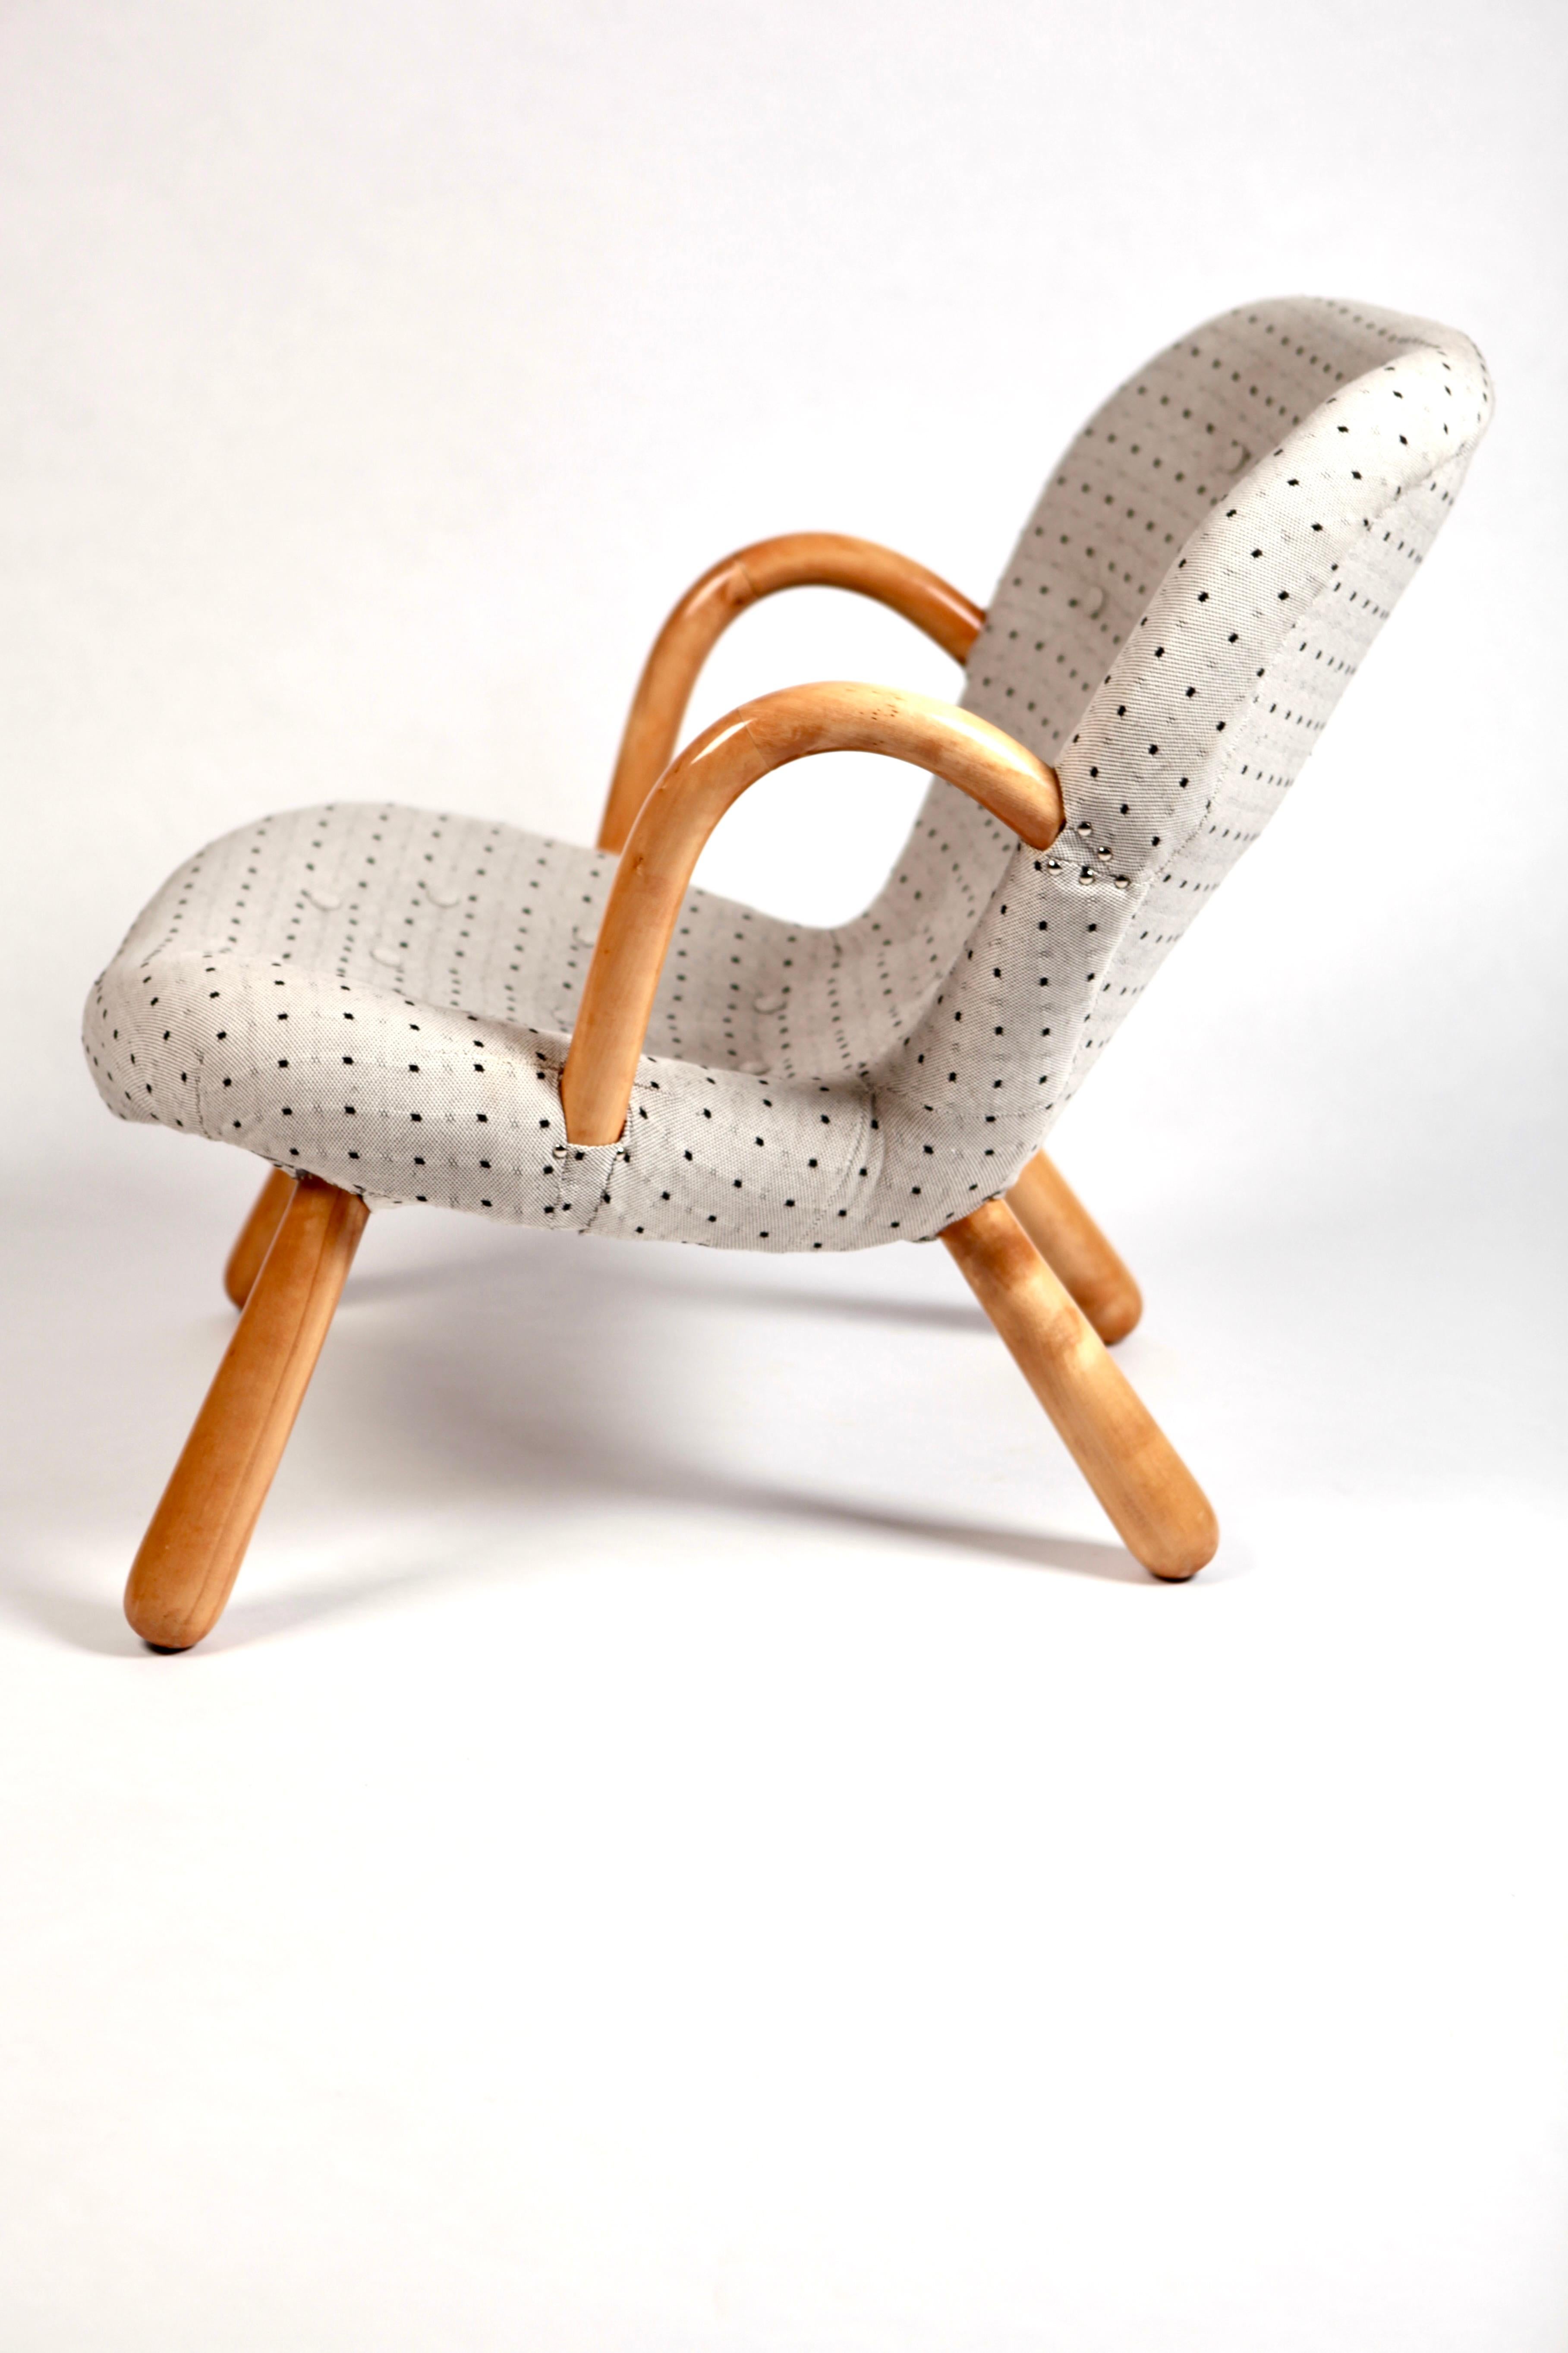 Fabric Philip Arctander Clam Chair by Nordisk Stål  Denmark, 1940s